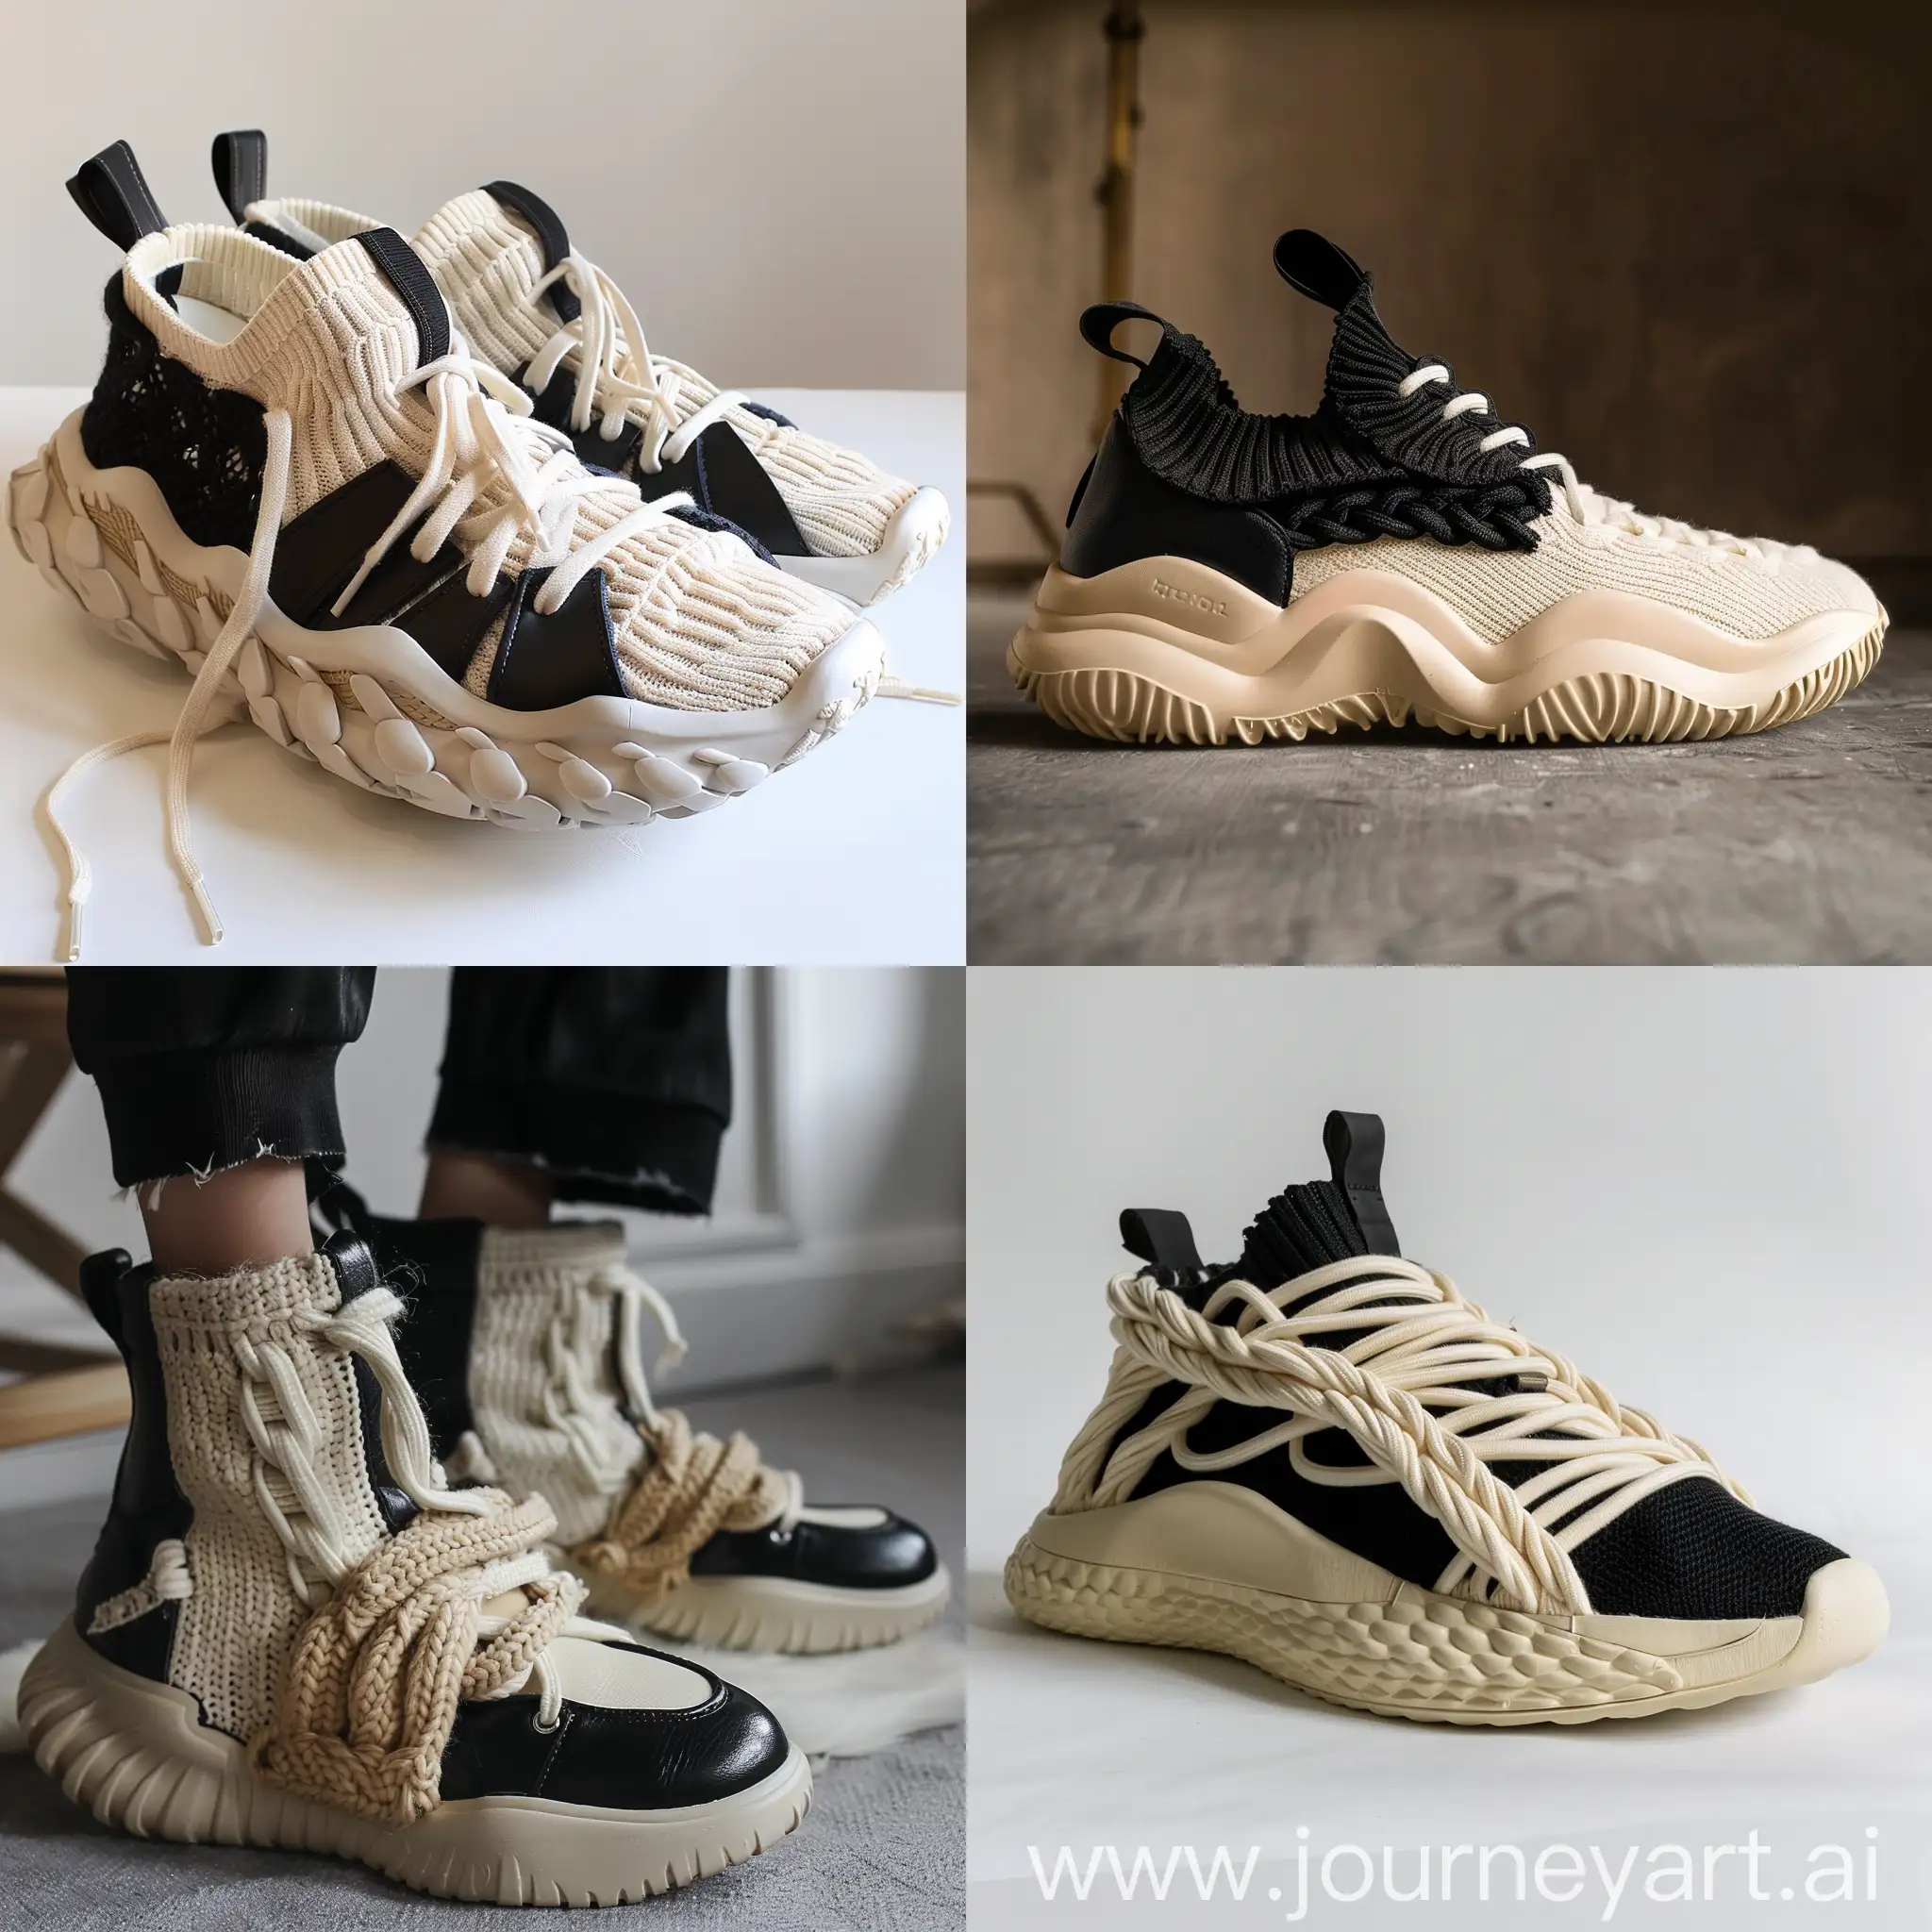 Sneakers design , inspiration by panda , some knitted cables on pit , rubber midsole , basic wide midsole , leather upper , chunky , trendy , color black/cream , knitted laces , low neck